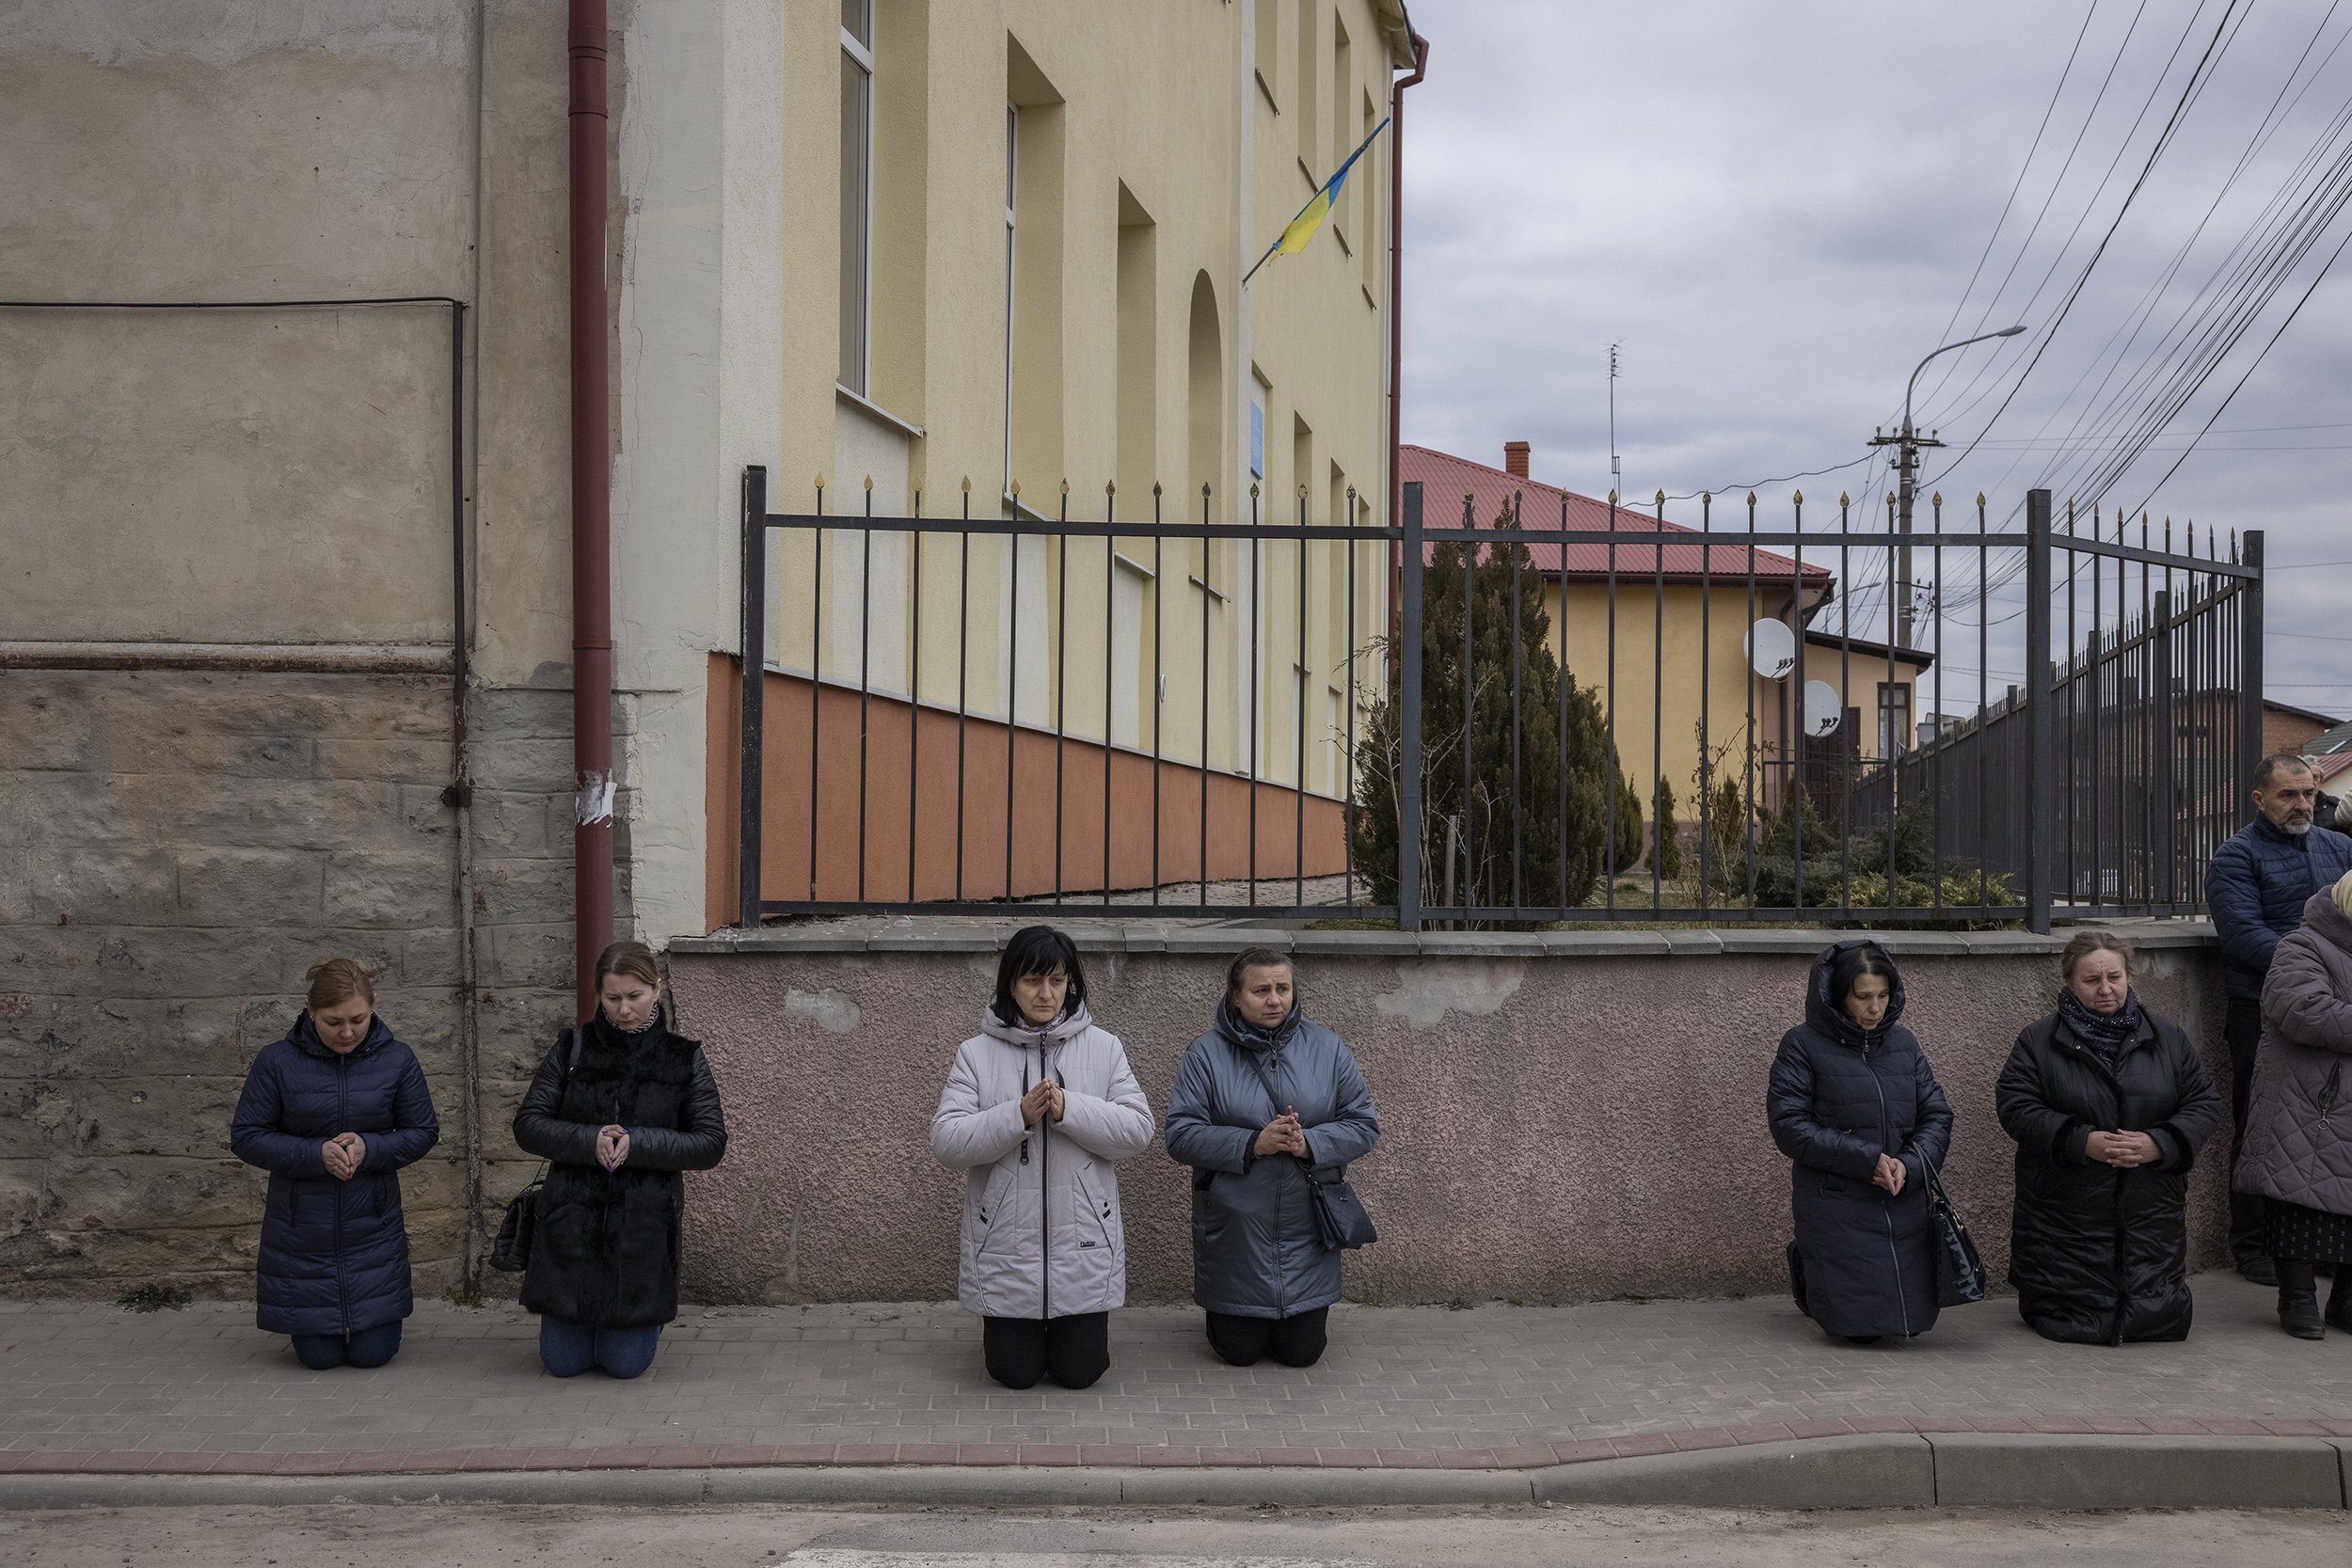  Locals came out of their houses or stopped on the street to pay their respects as a funeral procession for a Ukrainian soldier passed through the town of Yavoriv in western Ukraine. March, 2022. 